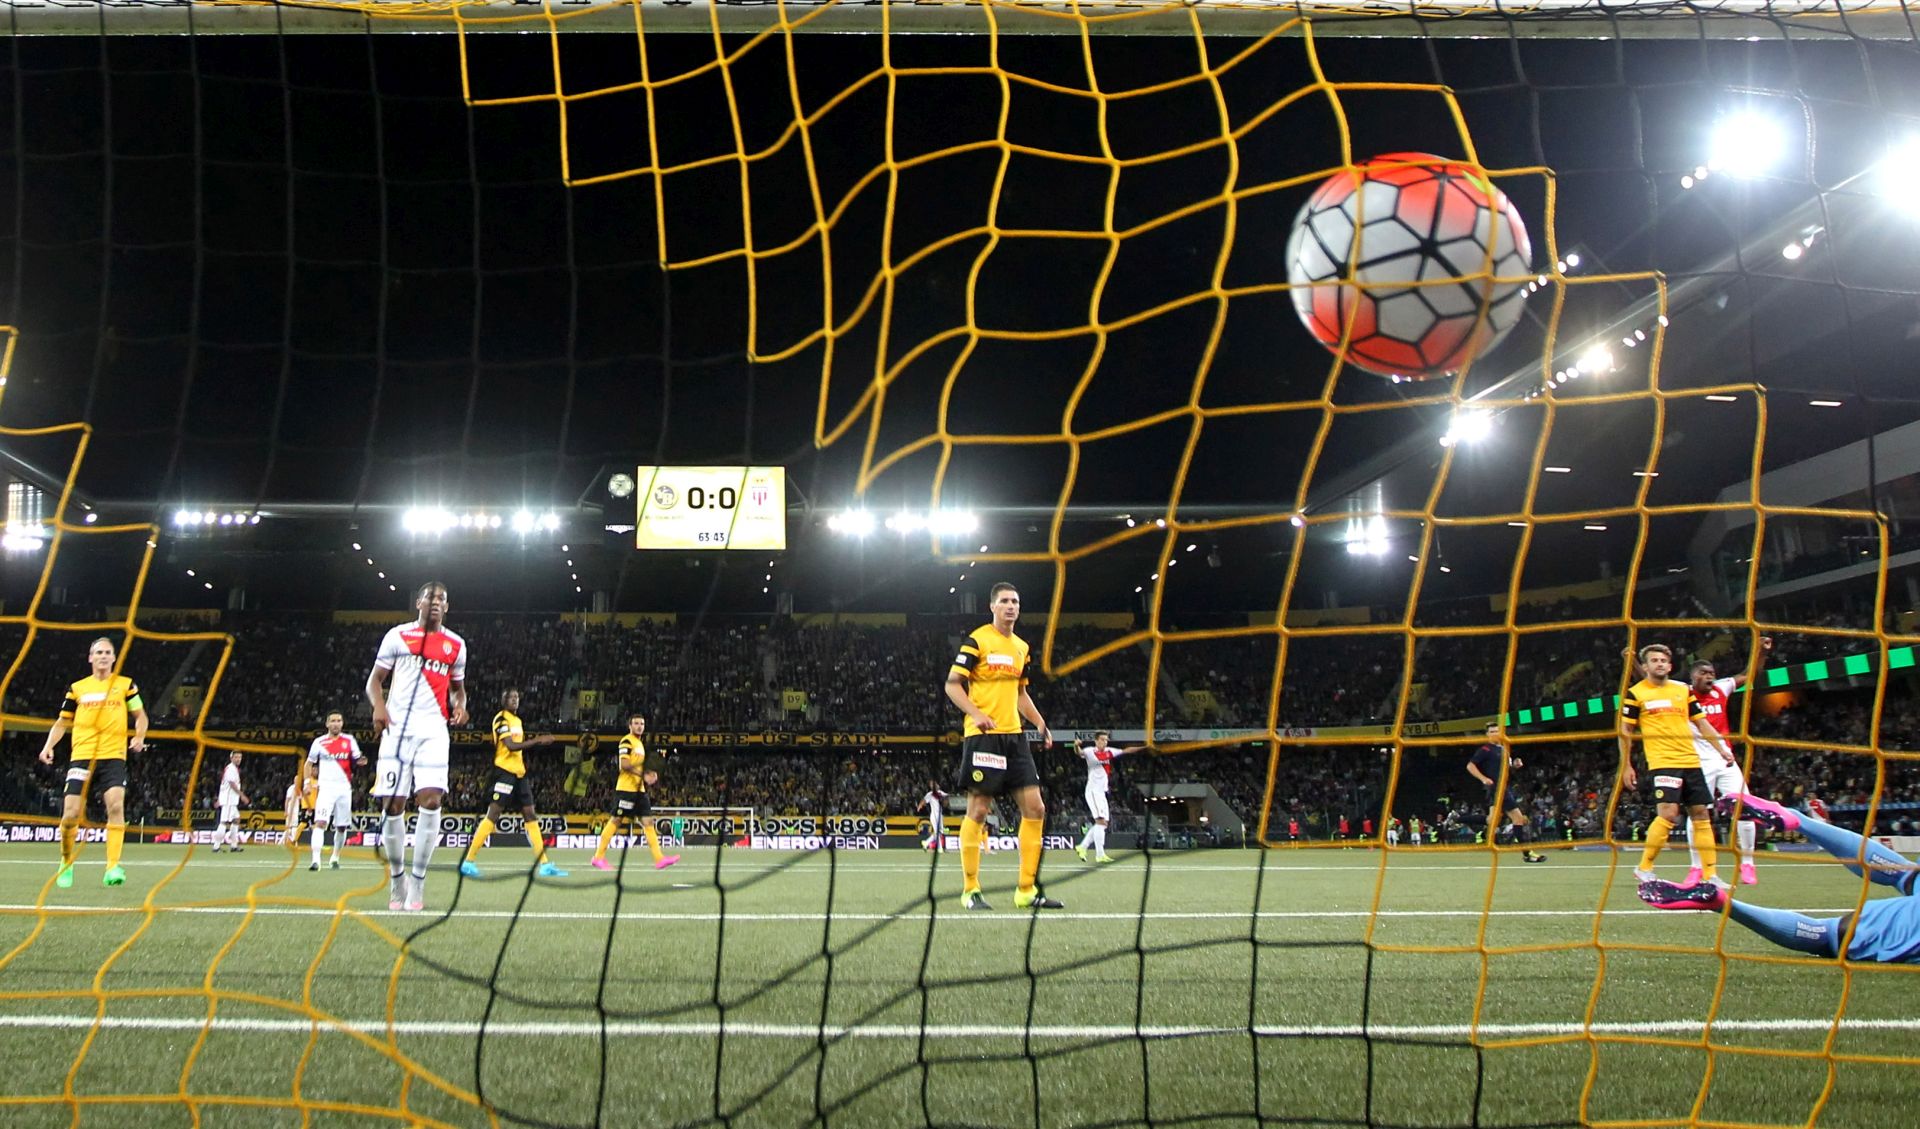 BERN, SWITZERLAND - JULY 28: Layvin Kurzawa of AS Monaco (not pictured) shoots his team's opening goal during the UEFA Champions League third qualifying round 1st leg match between BSC Young Boys and AS Monaco at Stade de Suisse on July 28, 2015 in Bern, Switzerland. (Photo by Philipp Schmidli/Getty Images)